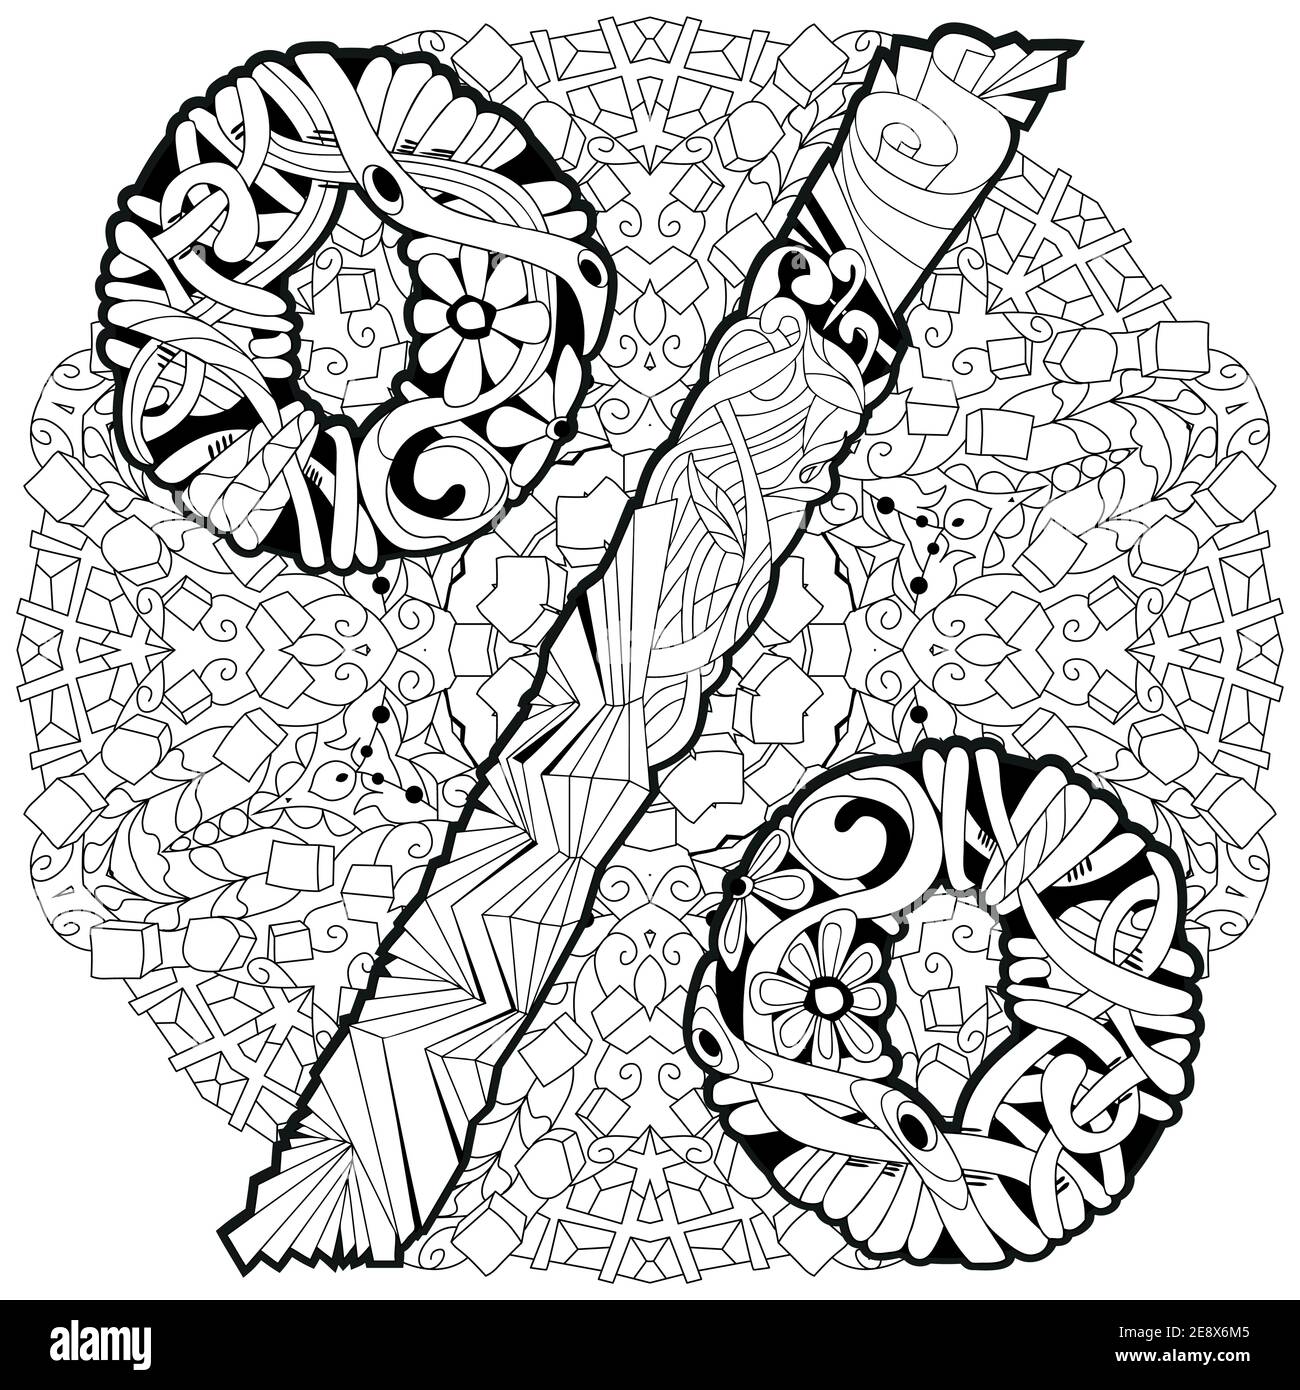 Hand-painted art design. Percent sign zentangle object on mandala for coloring. Stock Vector